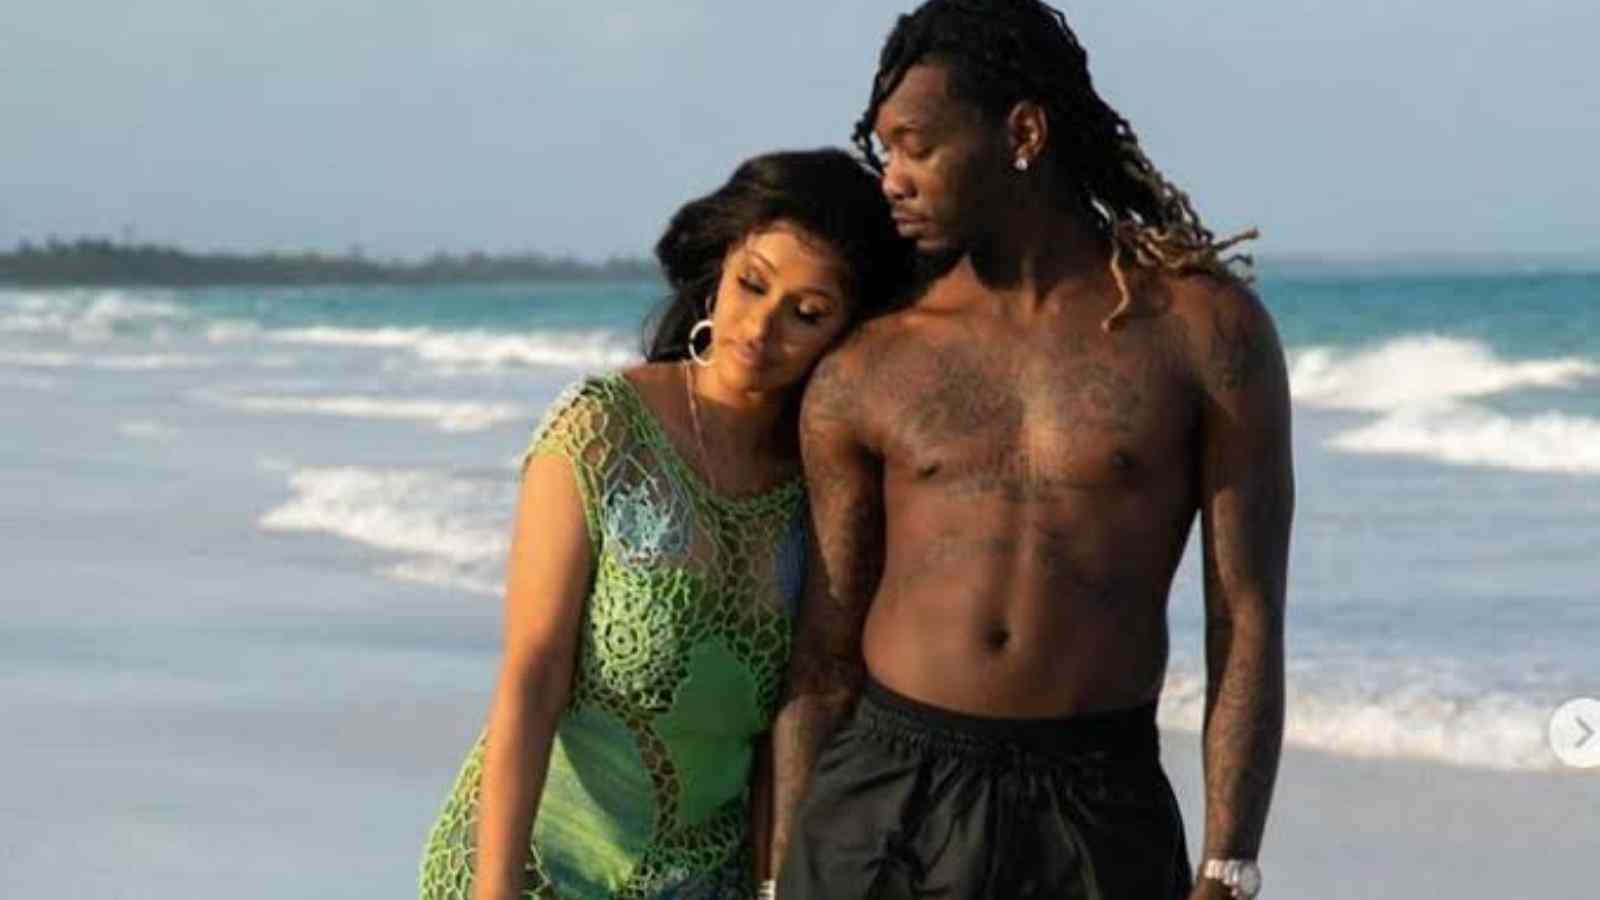 Cardi B and Offset walking along the beach